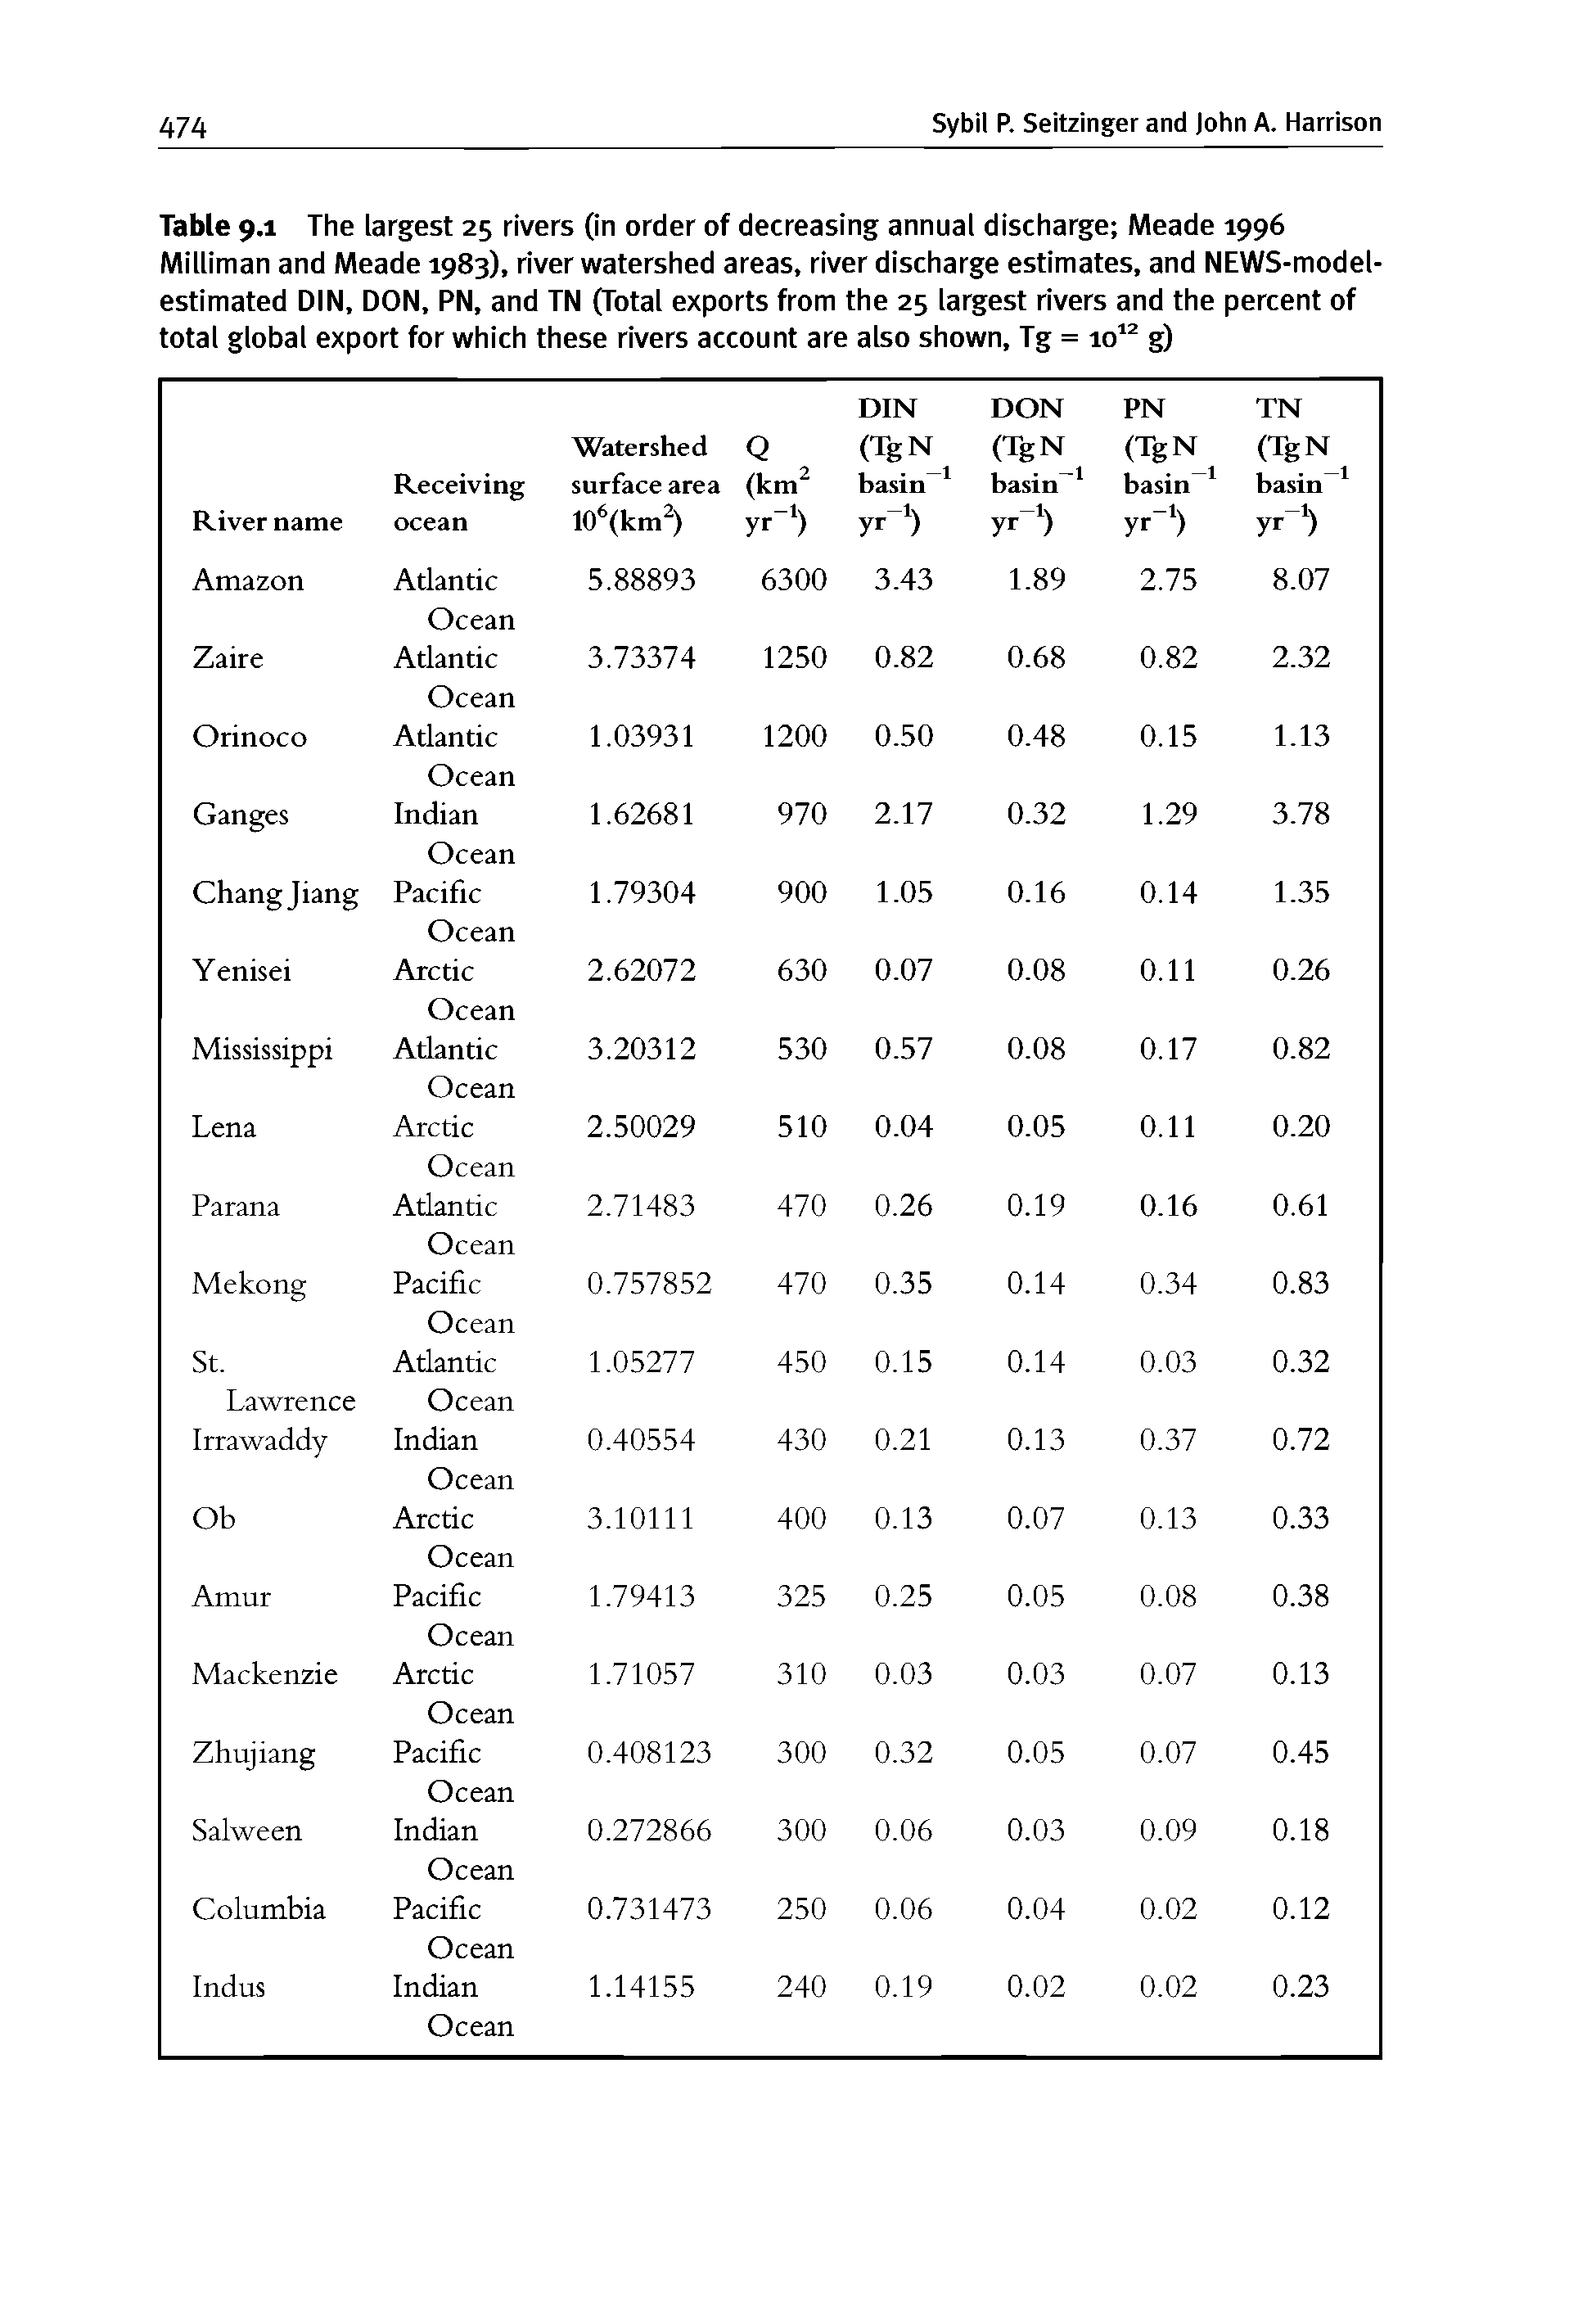 Table 9.1 The largest 25 rivers (in order of decreasing annual discharge Meade 1996 Milliman and Meade 1983), river watershed areas, river discharge estimates, and NEWS-model-estimated DIN, DON, PN, and TN (Total exports from the 25 largest rivers and the percent of total global export for which these rivers account are also shown, Tg = 10 g)...